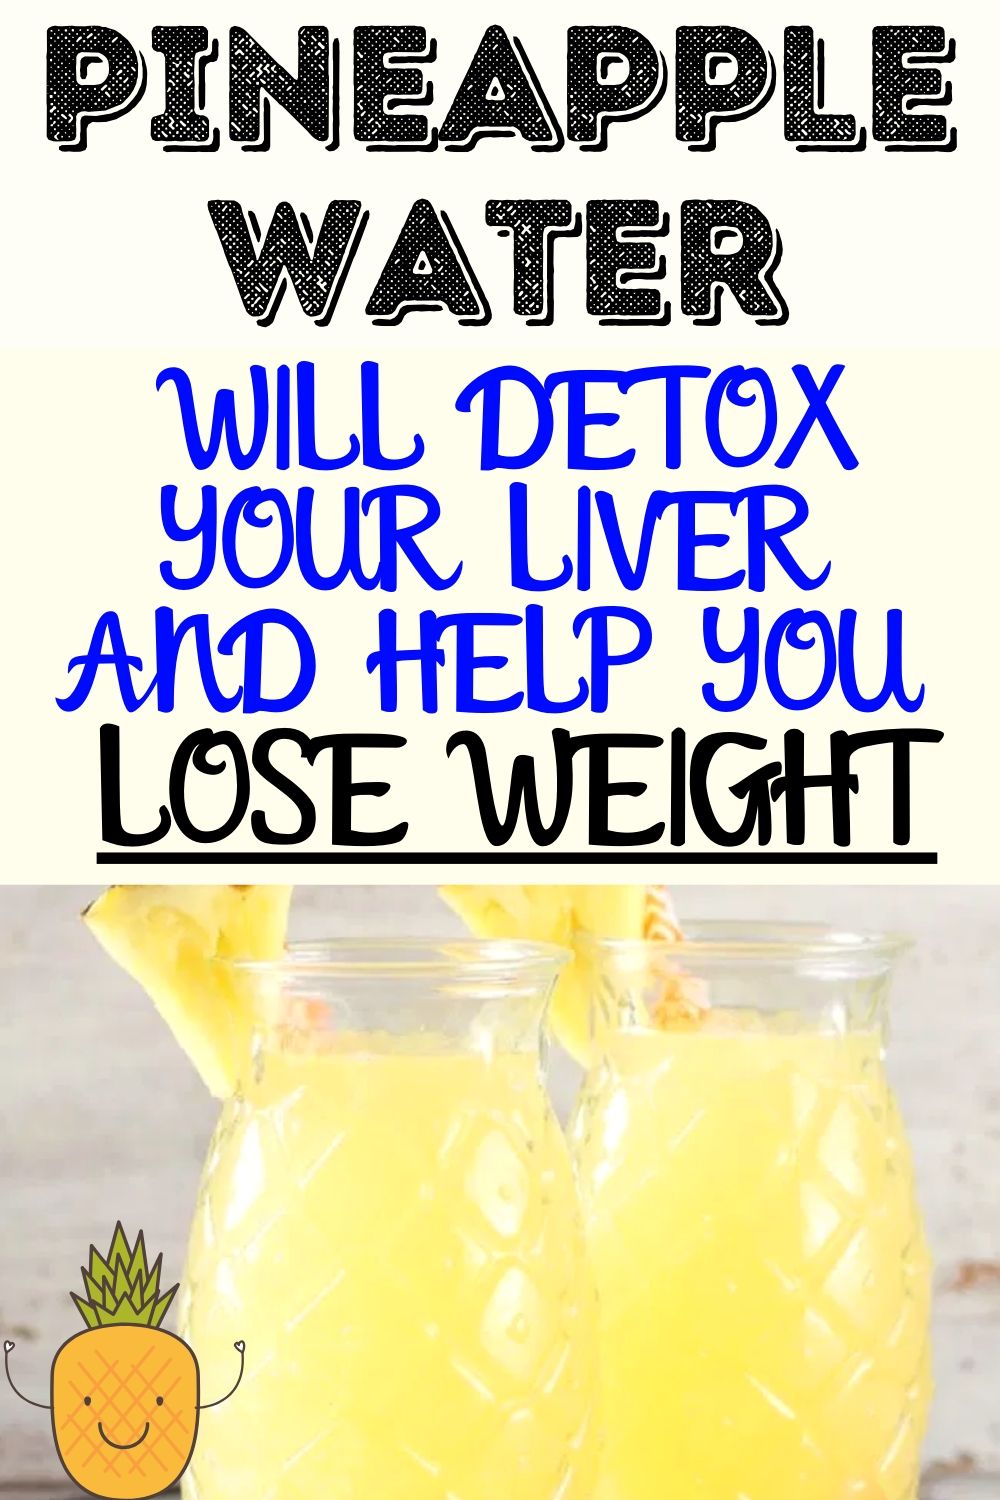 Pineapple Water Will Detox Your Liver .. Help You Lose Weight, Reduce ...